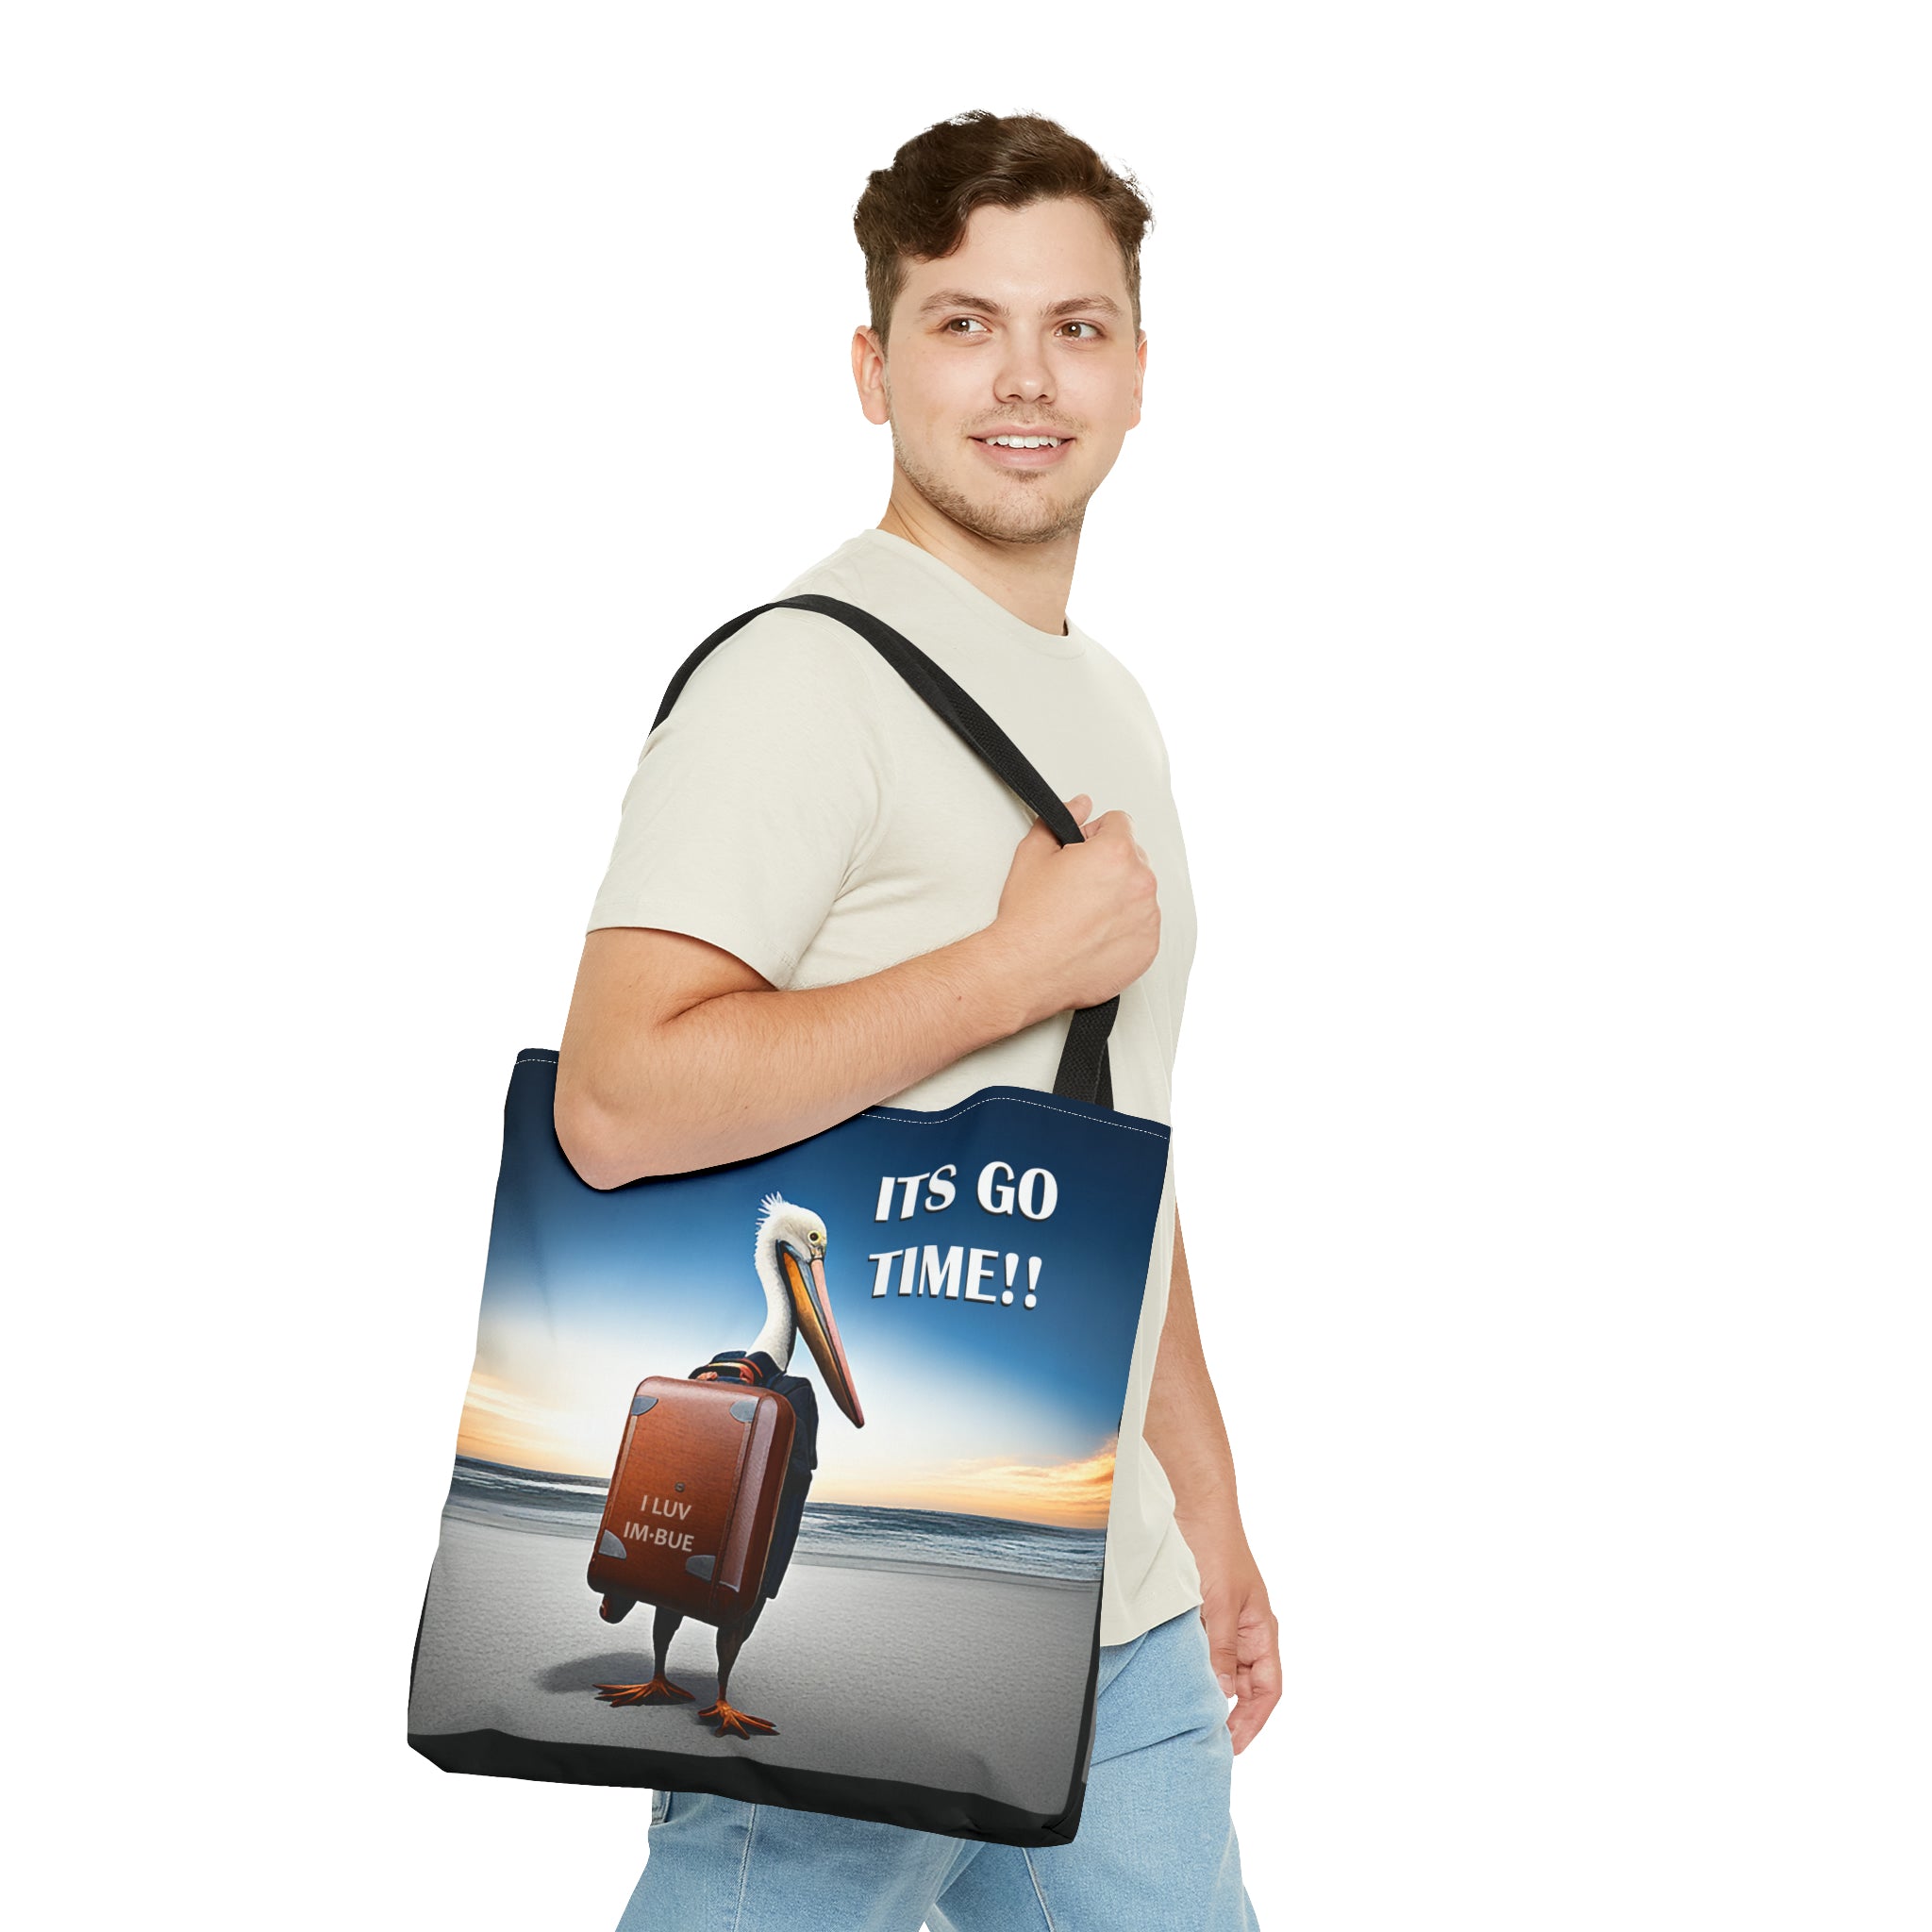 Its Go Time-Traveling Pelican Tote Bag